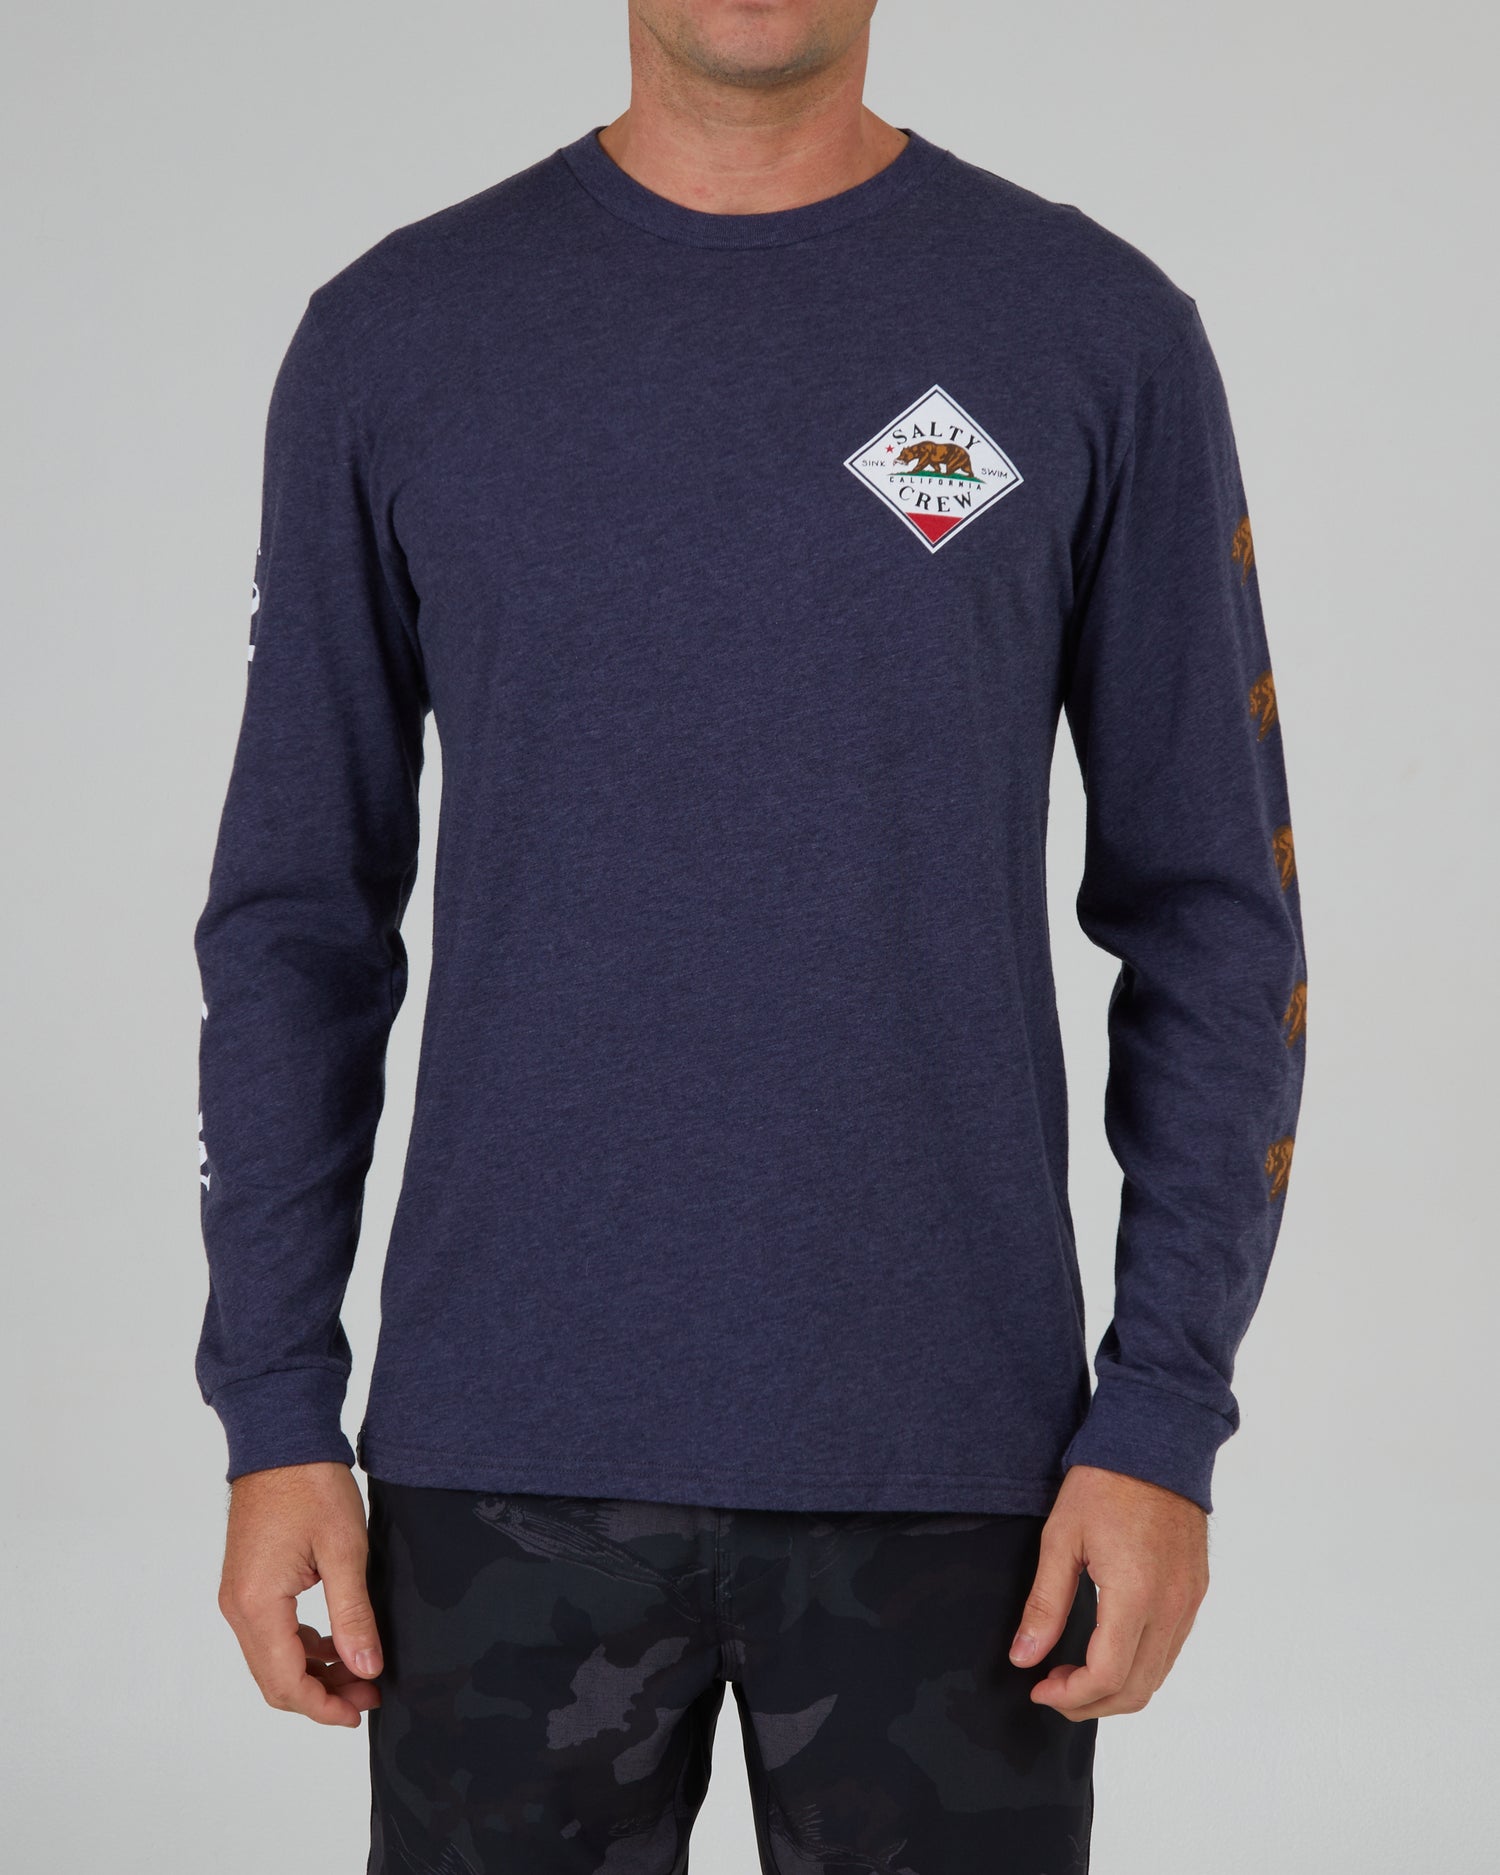 On body front of the Tippet Cali Navy Heather L/S Premium Tee